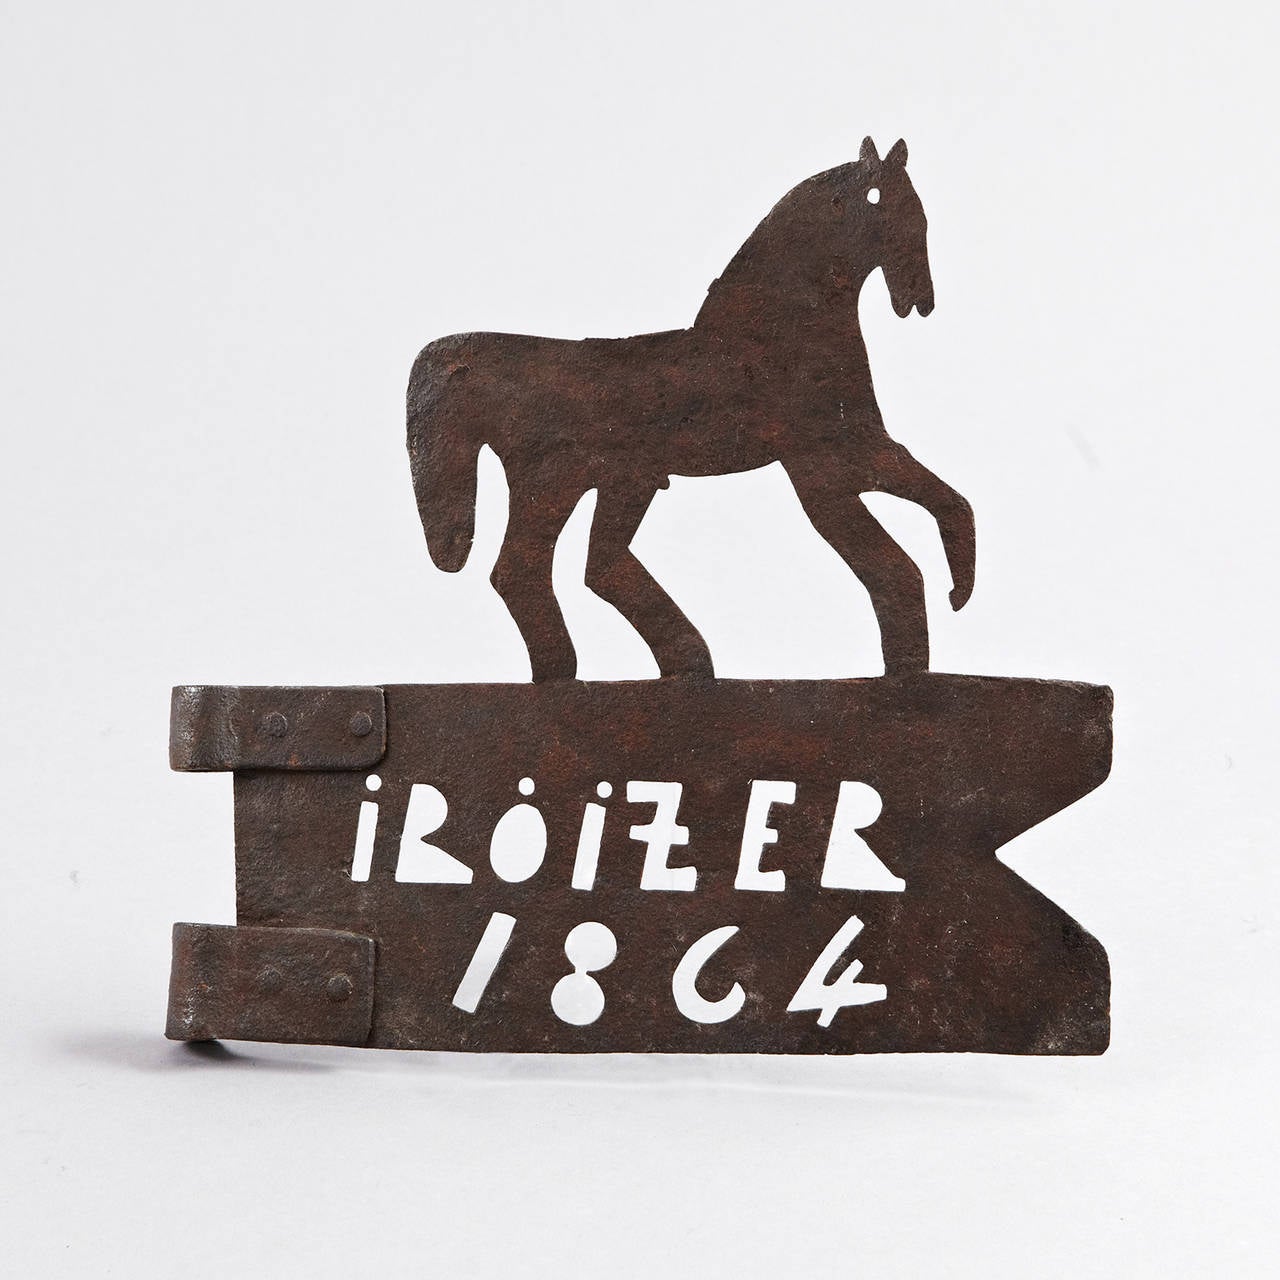 European metal (iron) weathervane of a banner on which a figure of a horse stands. The word "Iroizer" and the date "1864" are cut out of the metal. A hinge is attached to one end. Dimensions 12" x 12" x 1".